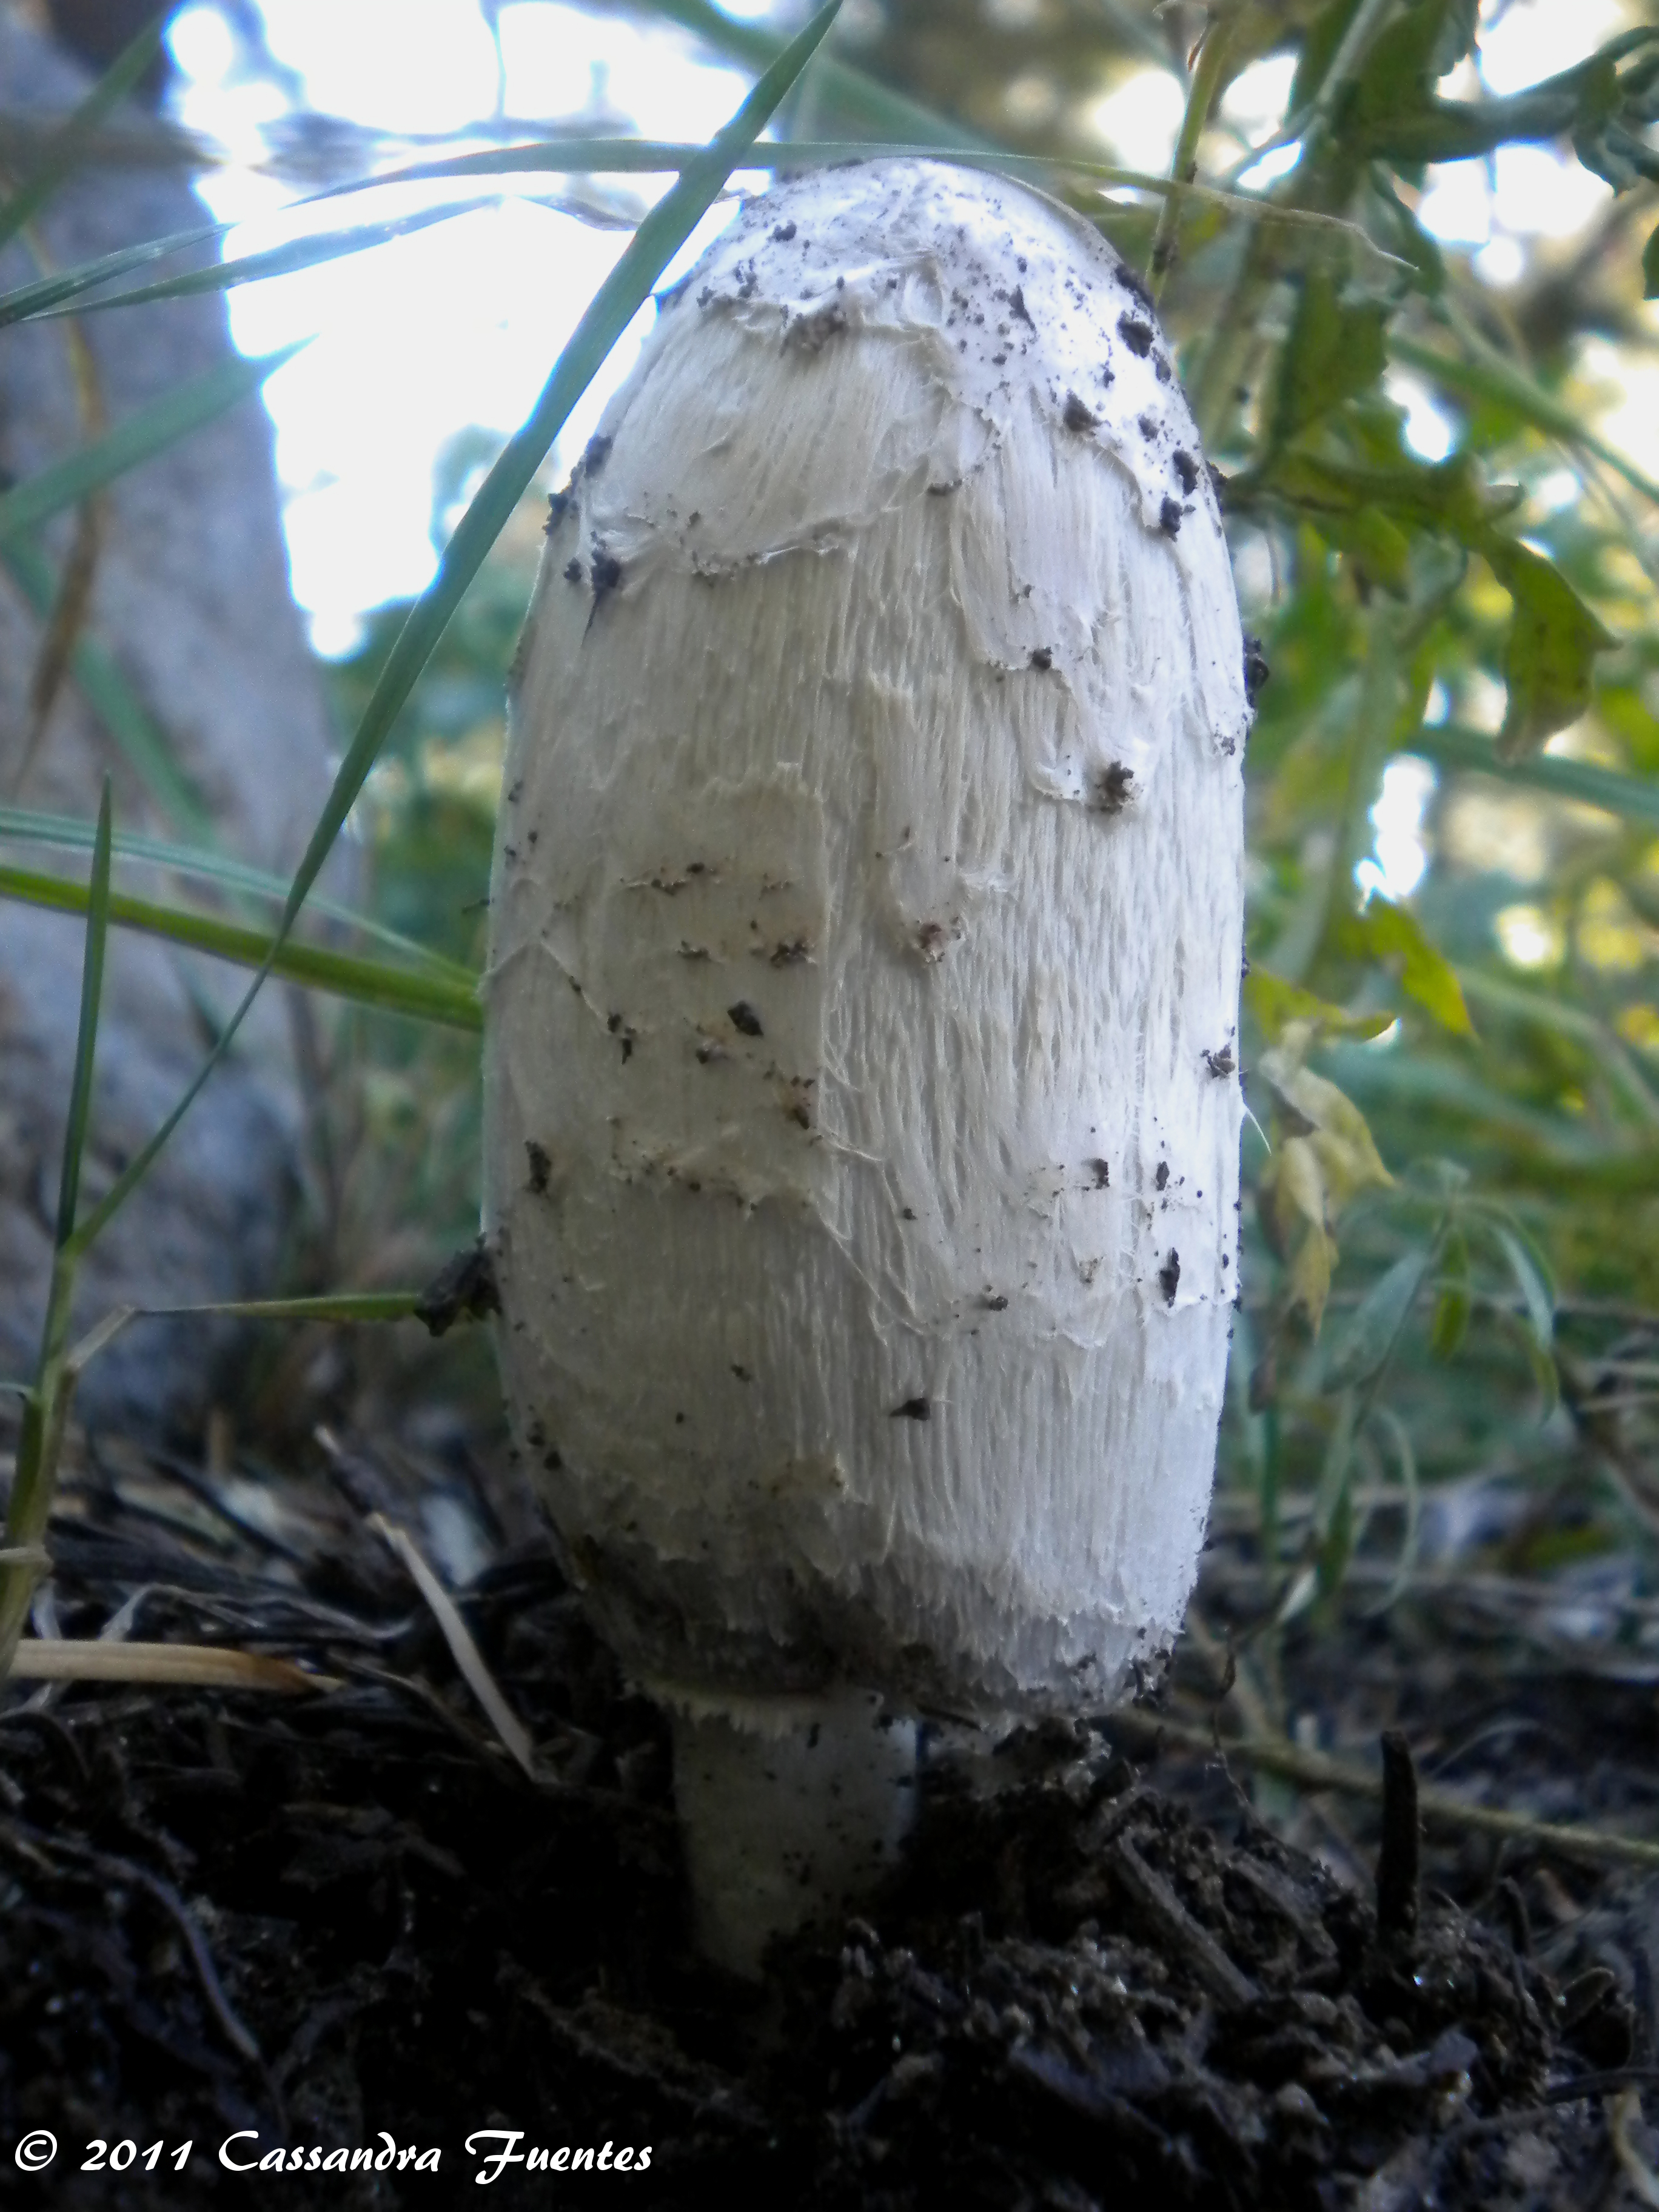 Coprinus comatus -- What Is Going On With That Inky Cap? | Fungus ...